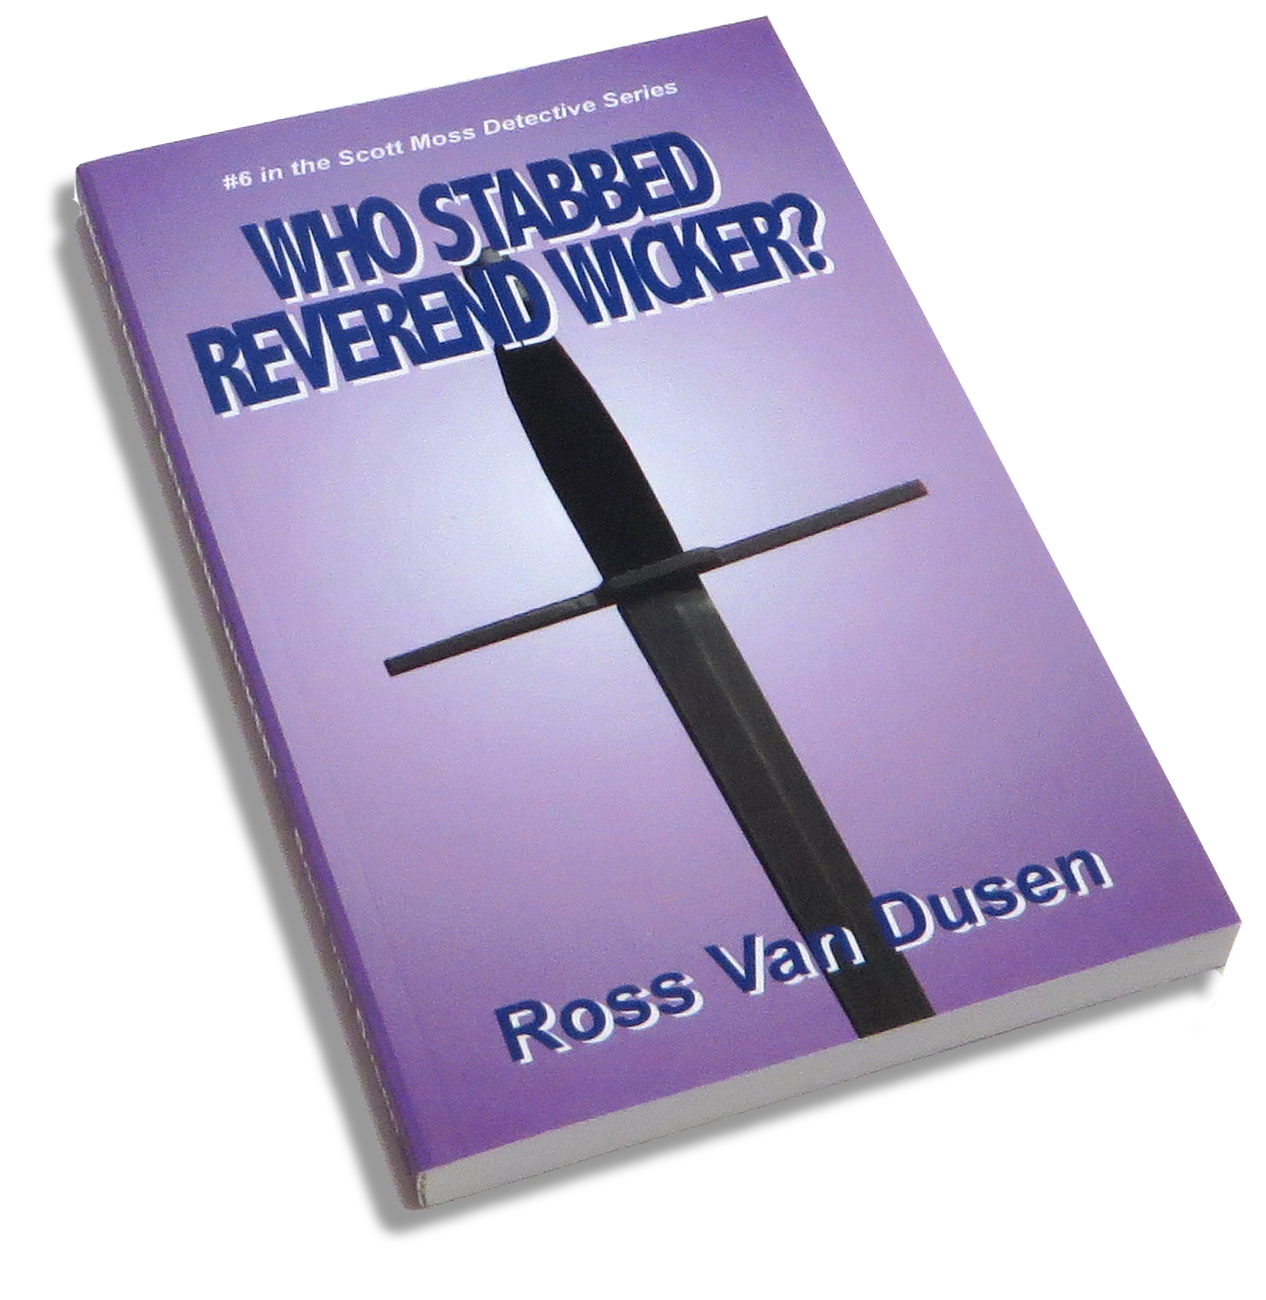 Who Stabbed Reverend Wicker? book